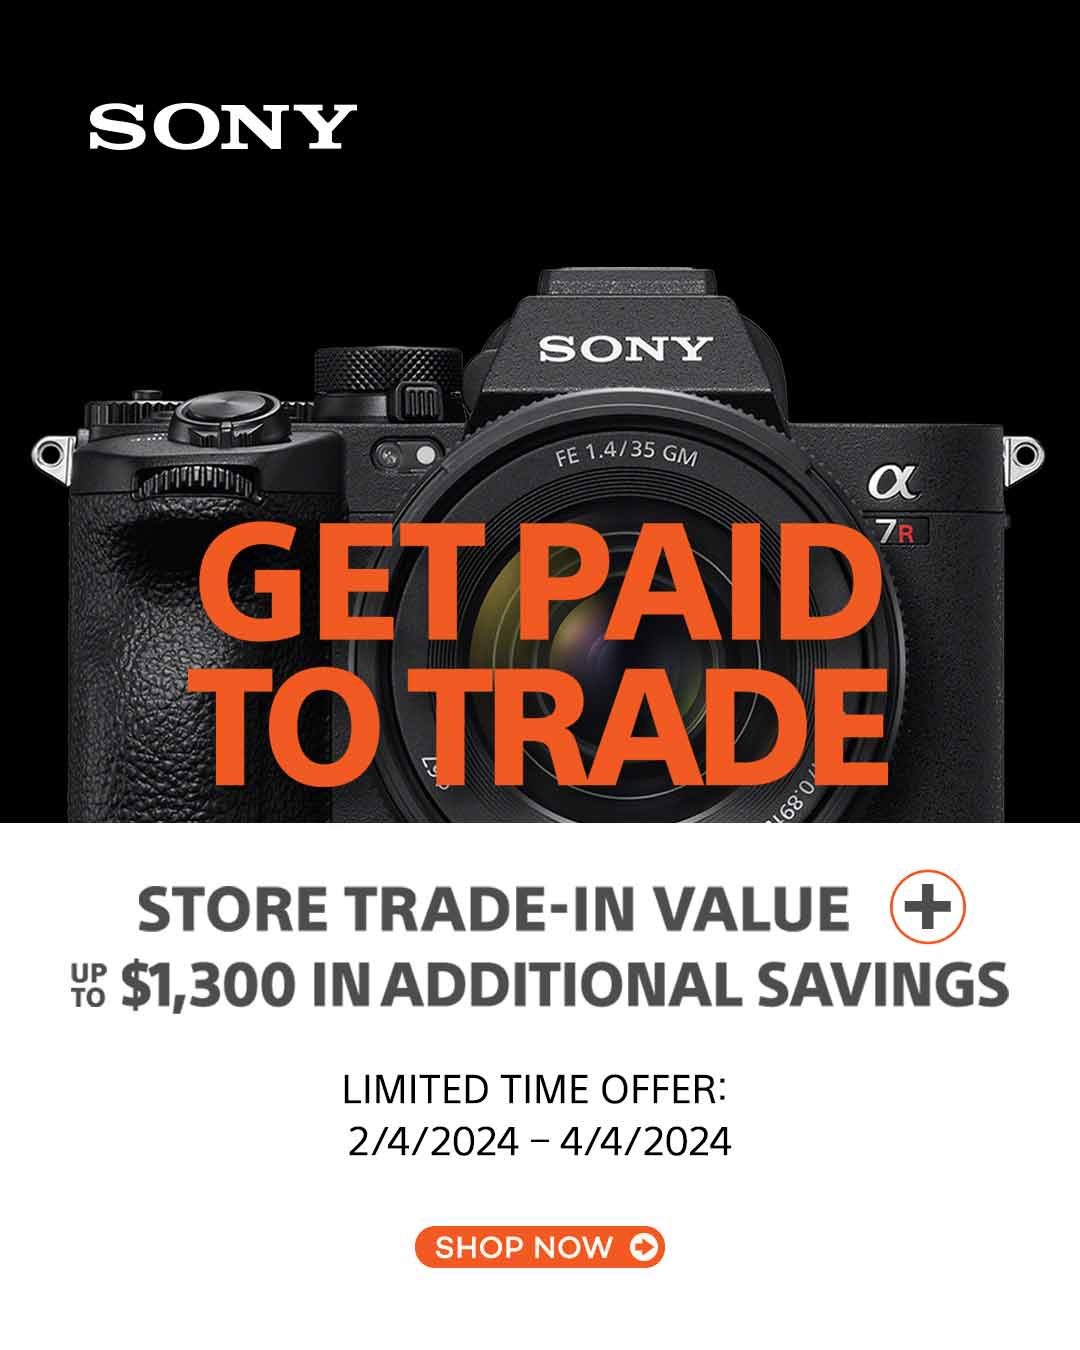 Get Paid to Trade with Sony